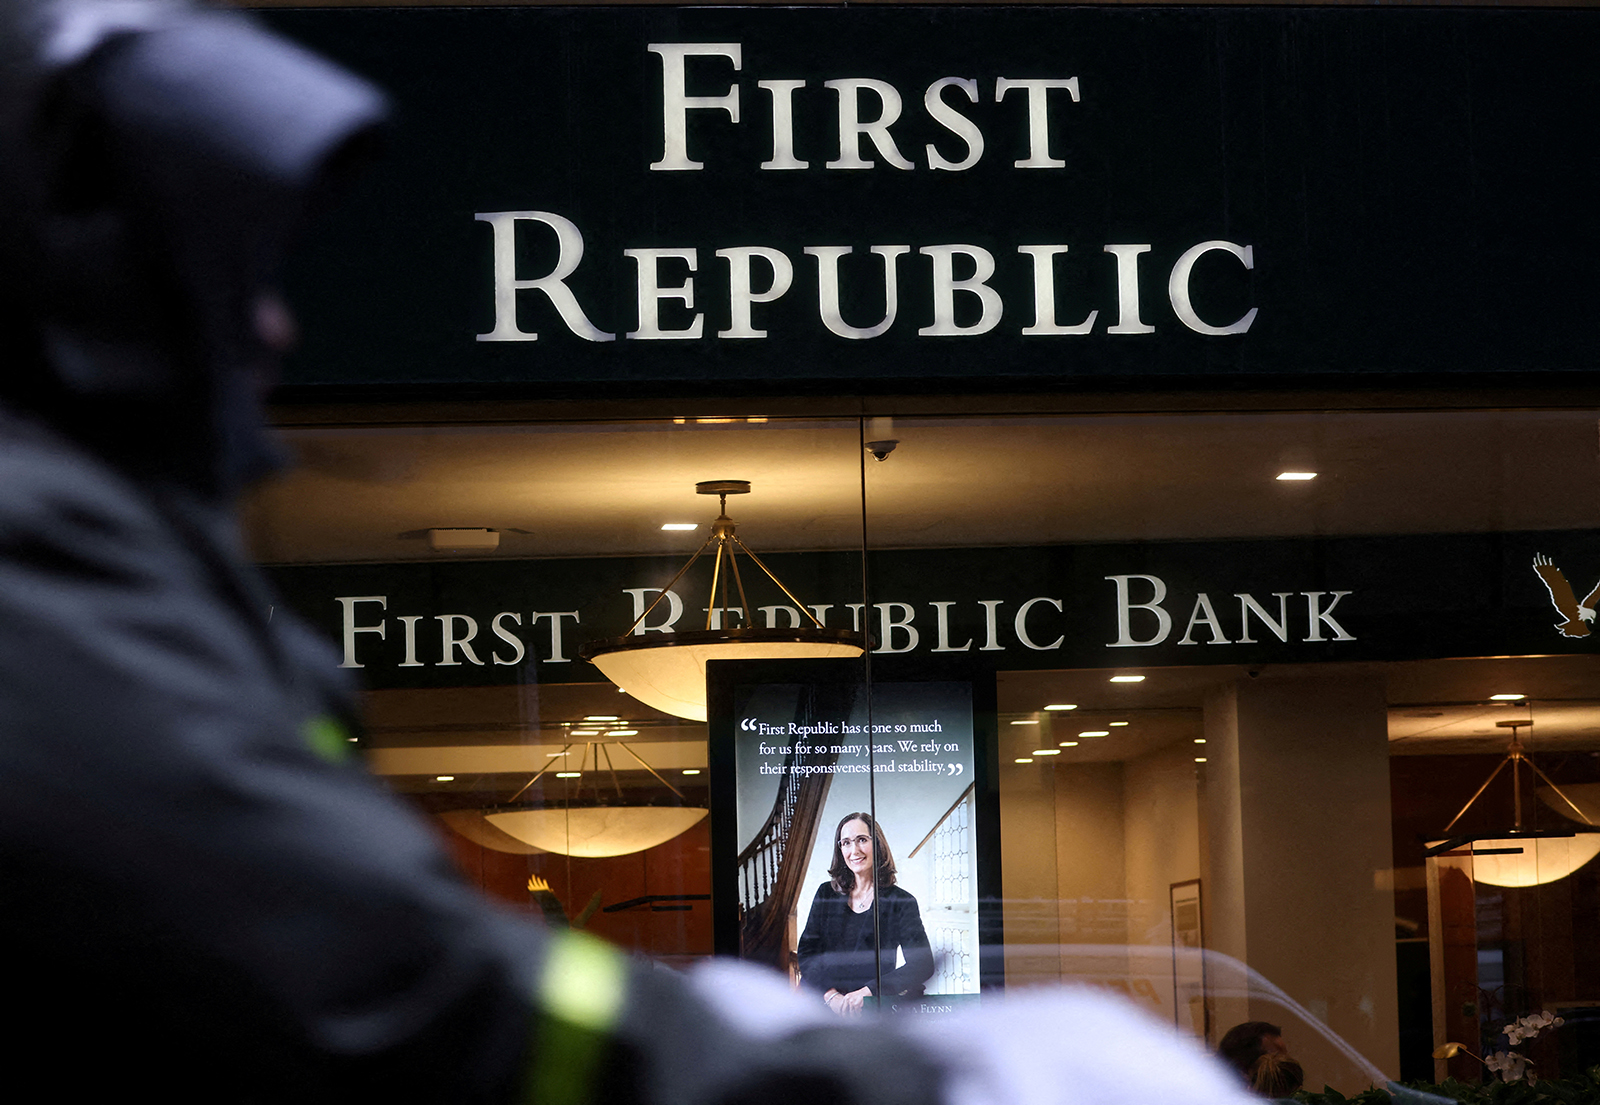 A First Republic Bank branch is pictured in Midtown Manhattan in New York City on March 13.